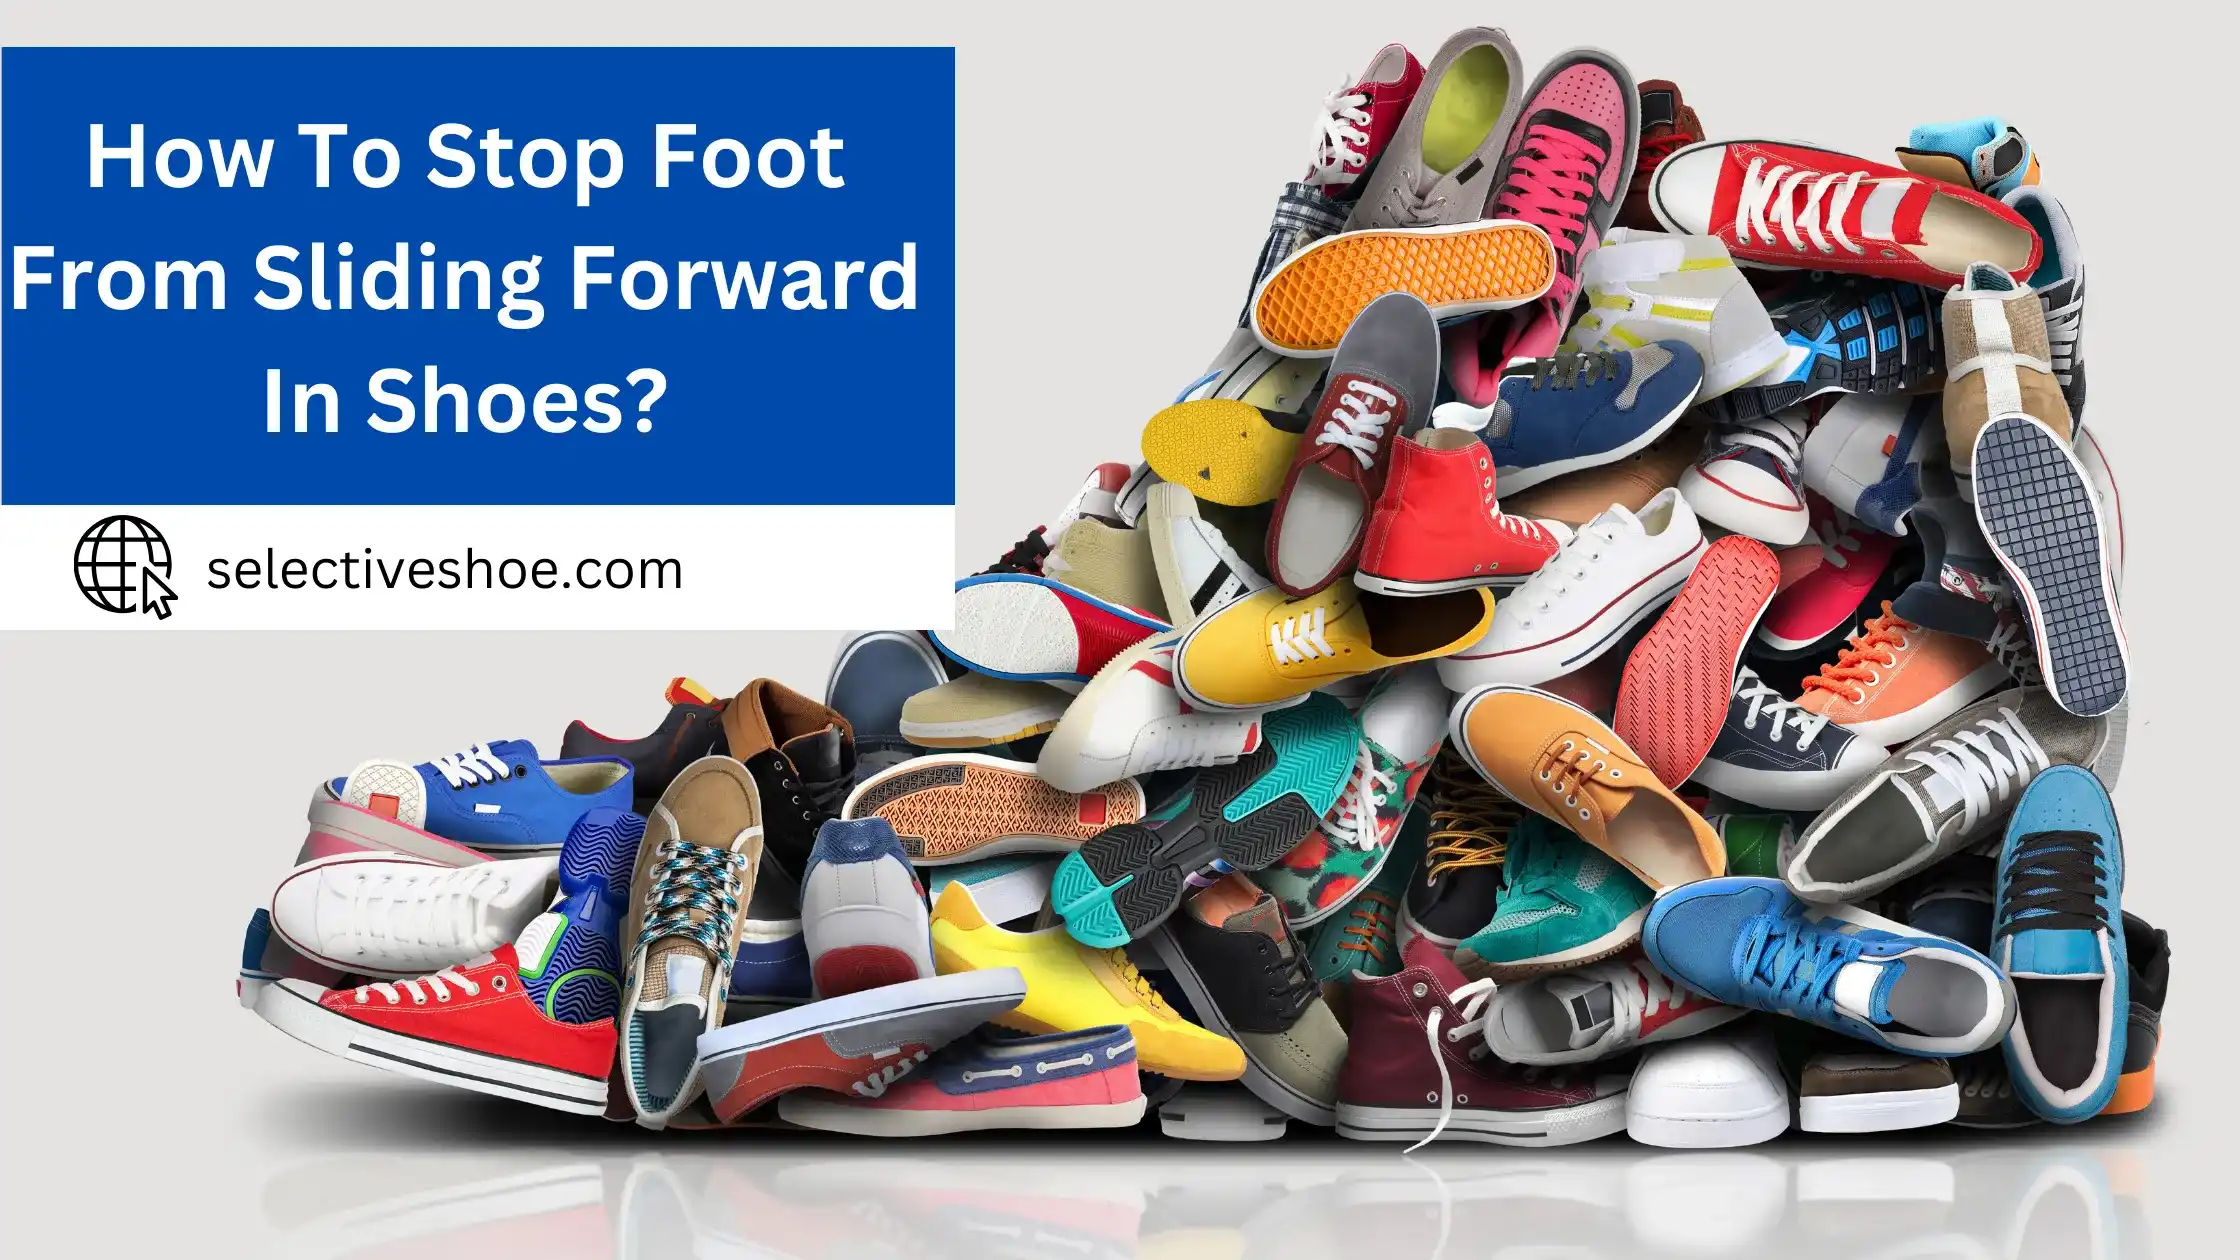 How To Stop Foot From Sliding Forward In Shoes? Latest Guide